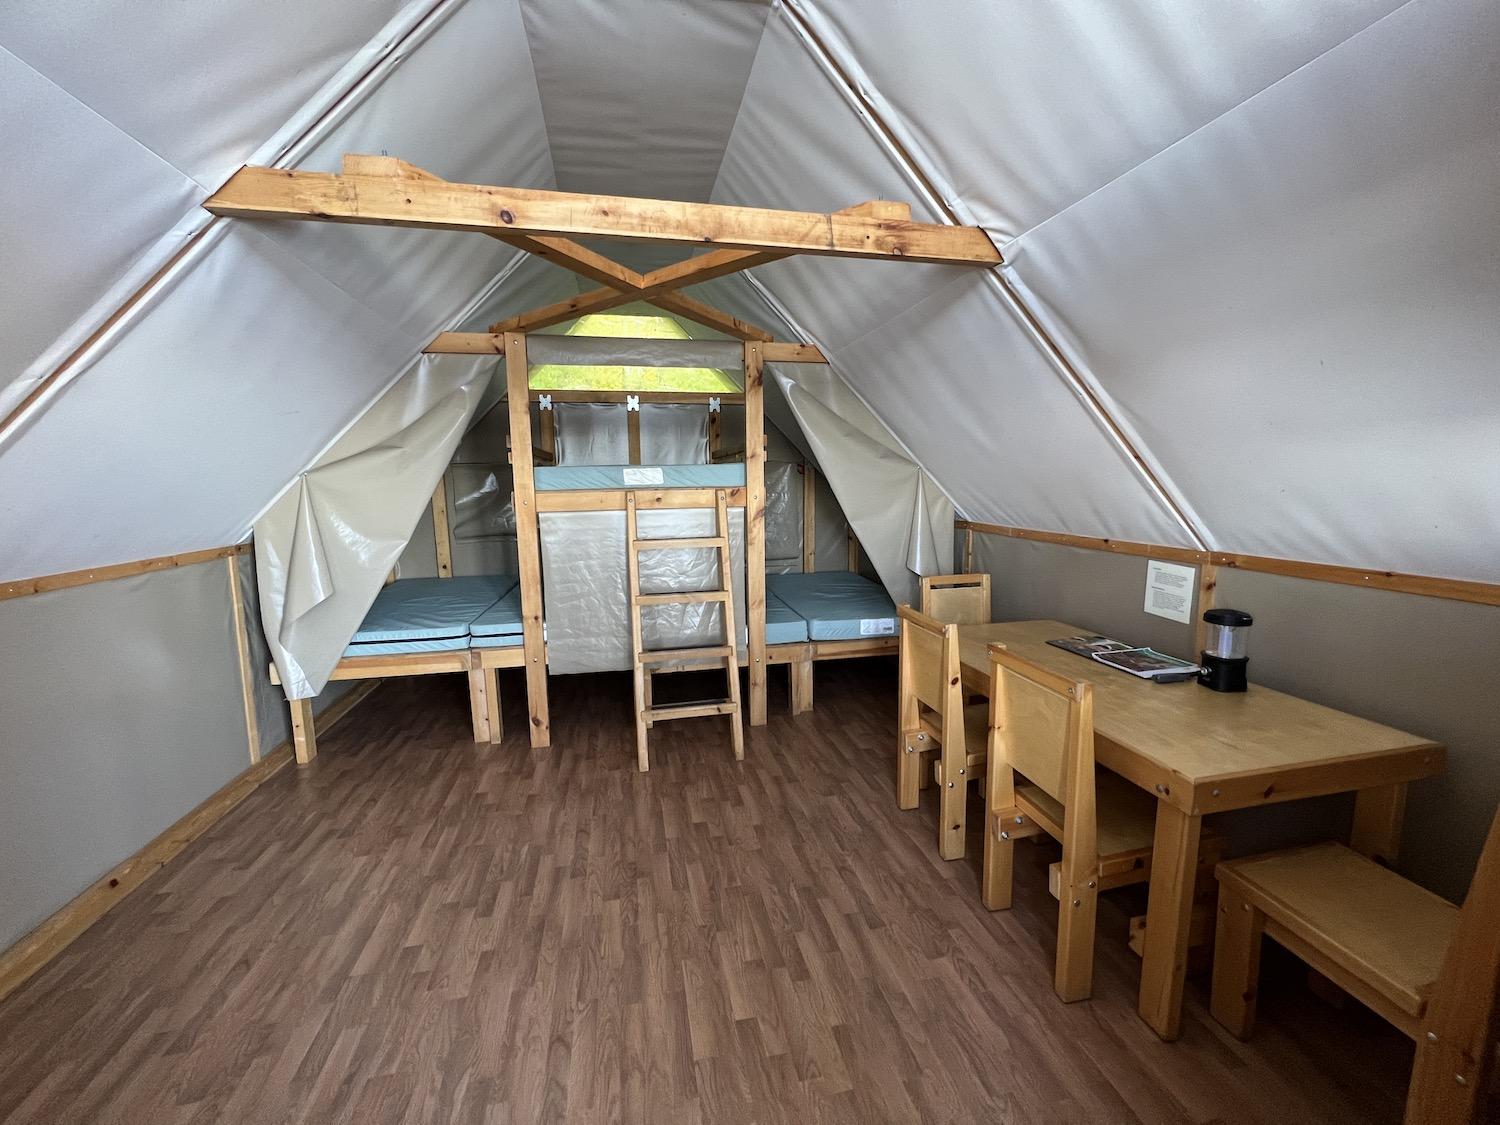 Inside my oTENTik, a form of roofed accommodation at Parks Canada sites.